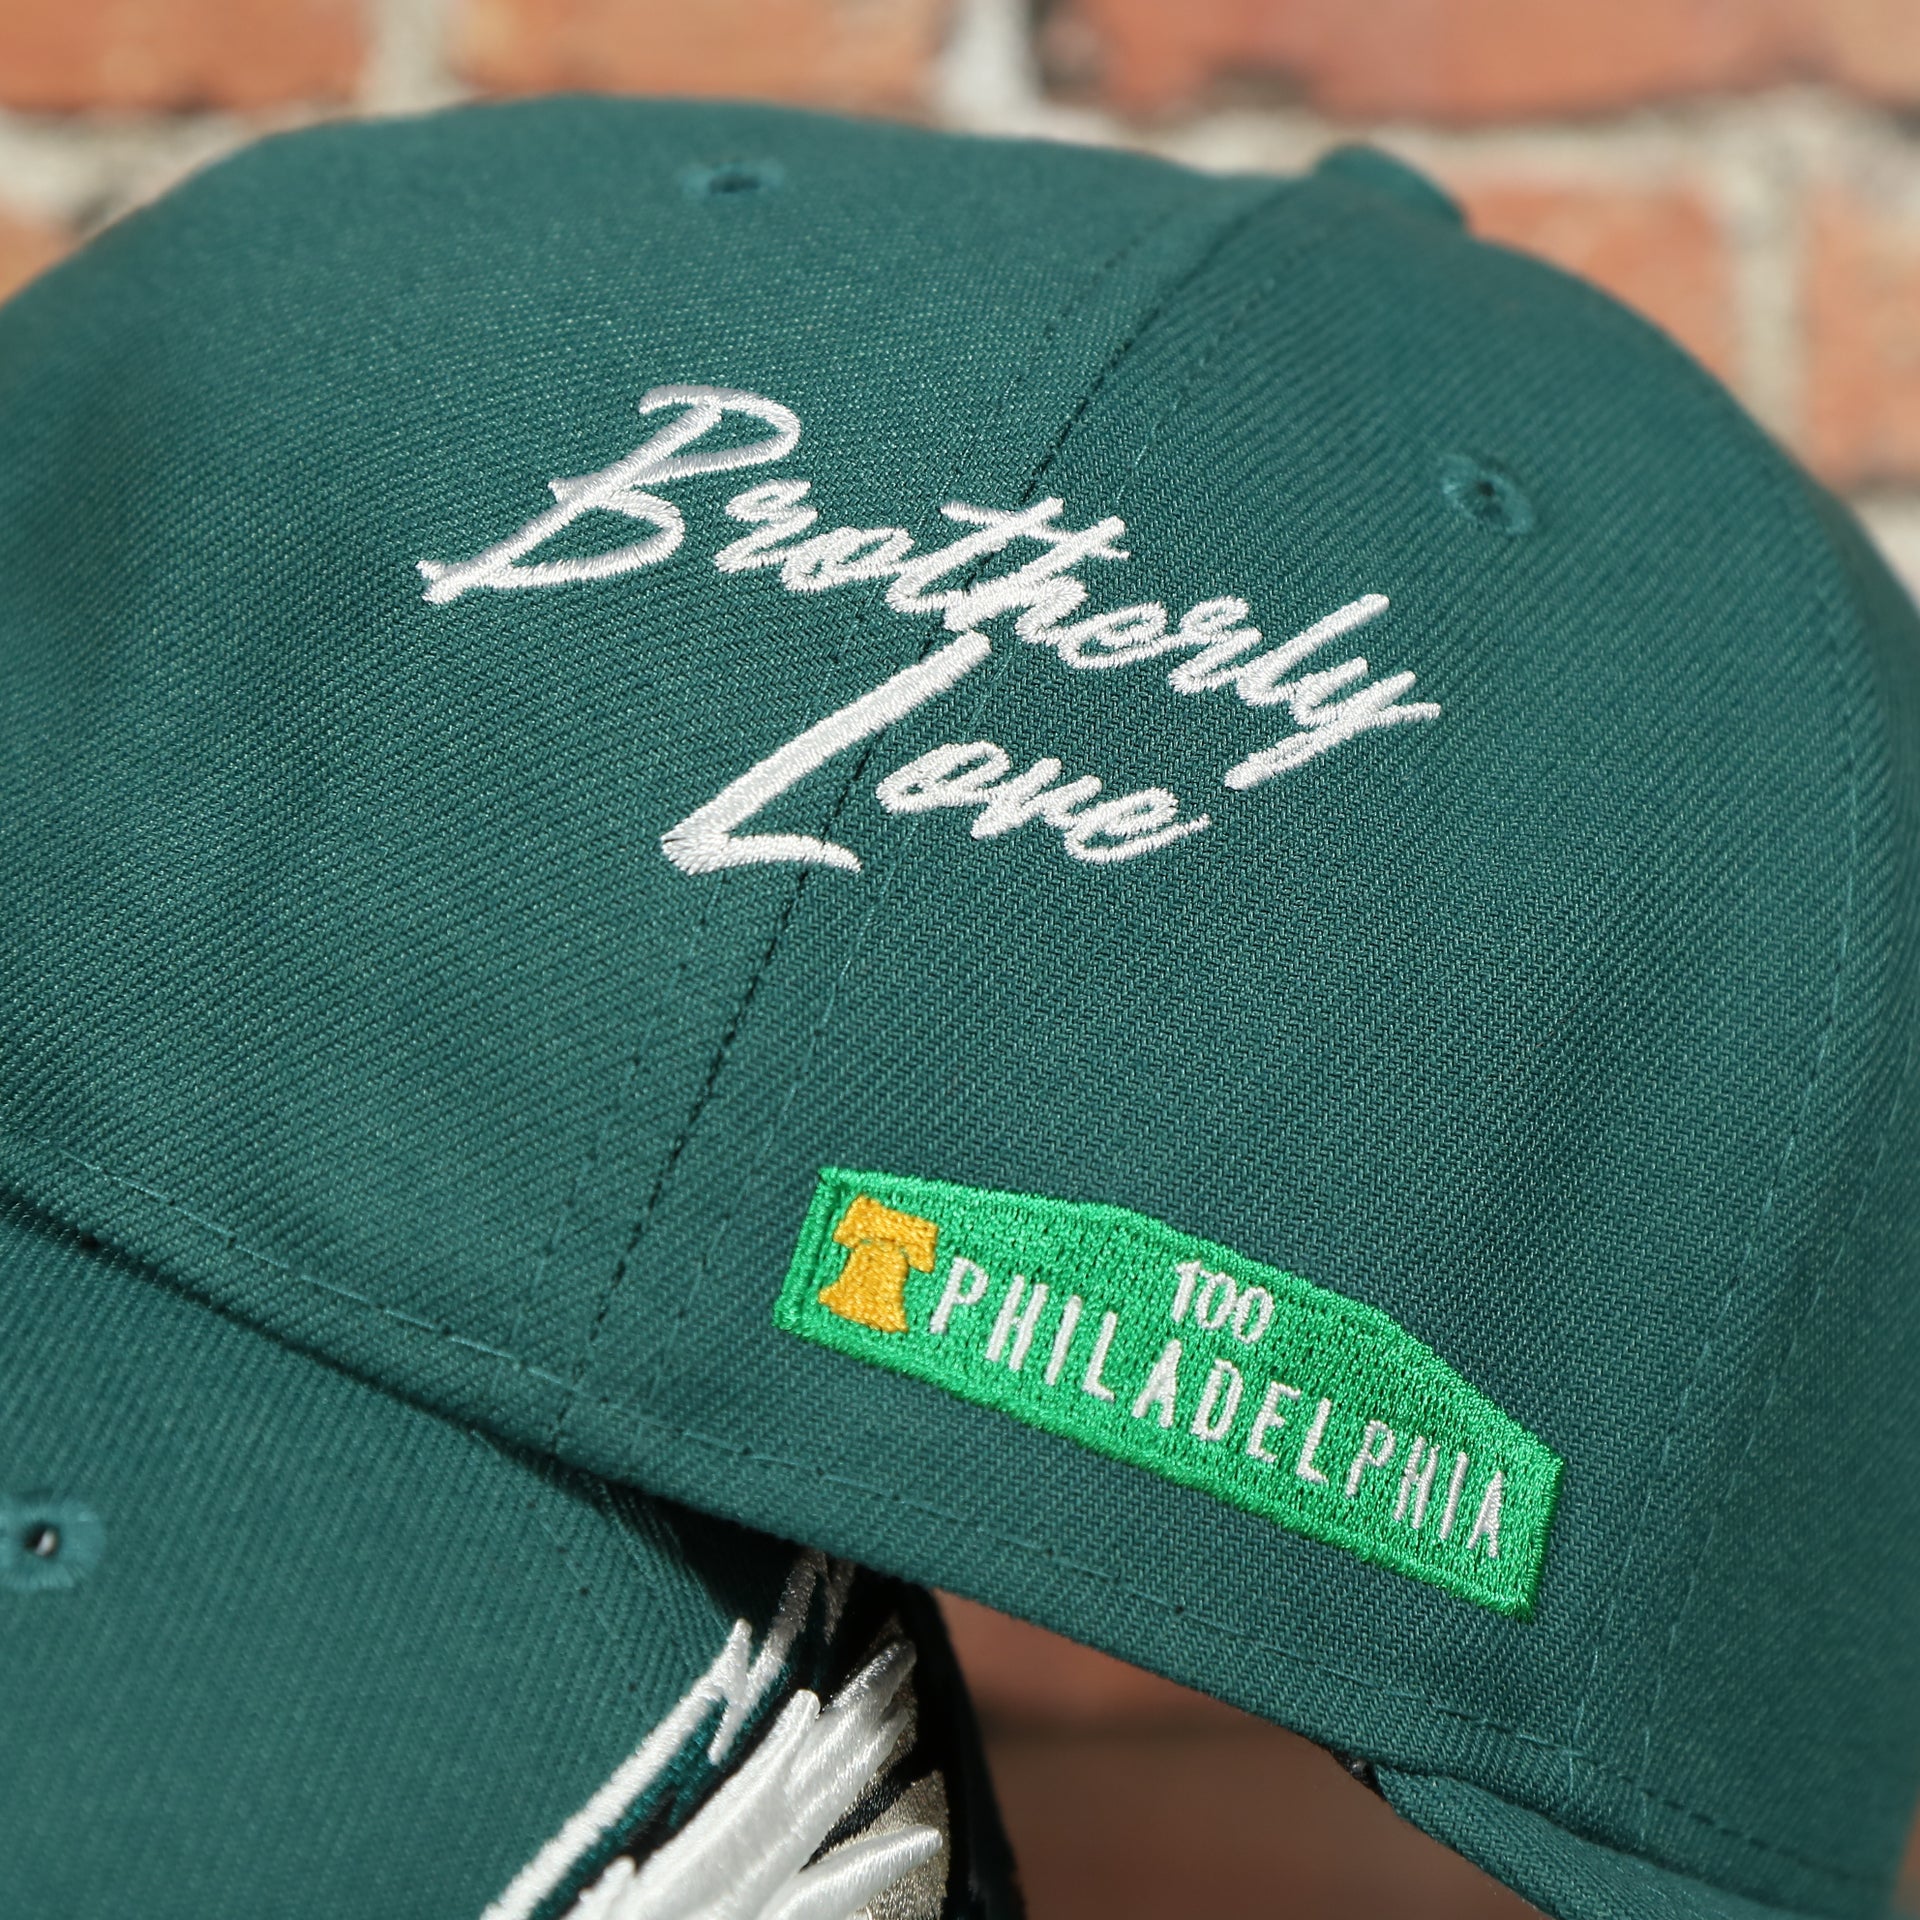 brotherly love sign and philadelphia 100 street sign on the Philadelphia Eagles City Transit All Over Side Patch Gray Bottom 59Fifty Fitted Cap